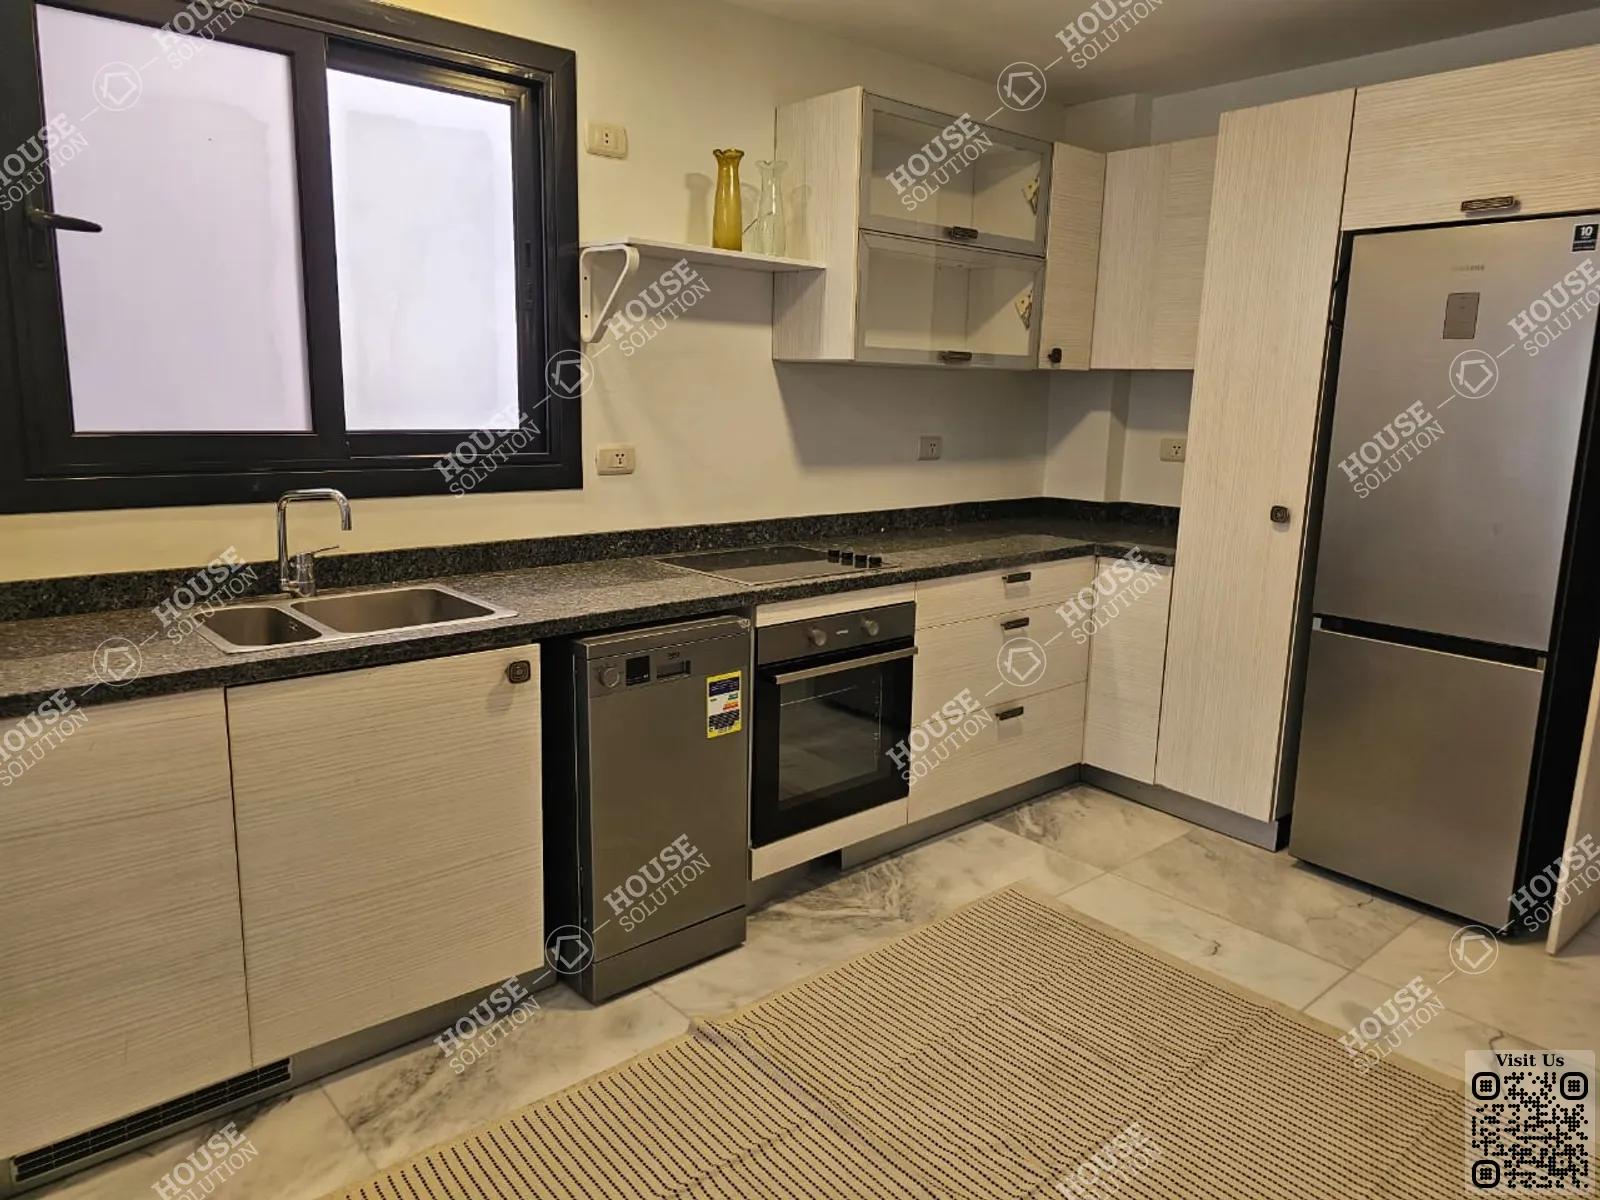 KITCHEN  @ Apartments For Rent In Maadi Maadi Sarayat Area: 145 m² consists of 2 Bedrooms 3 Bathrooms Modern furnished 5 stars #5904-1